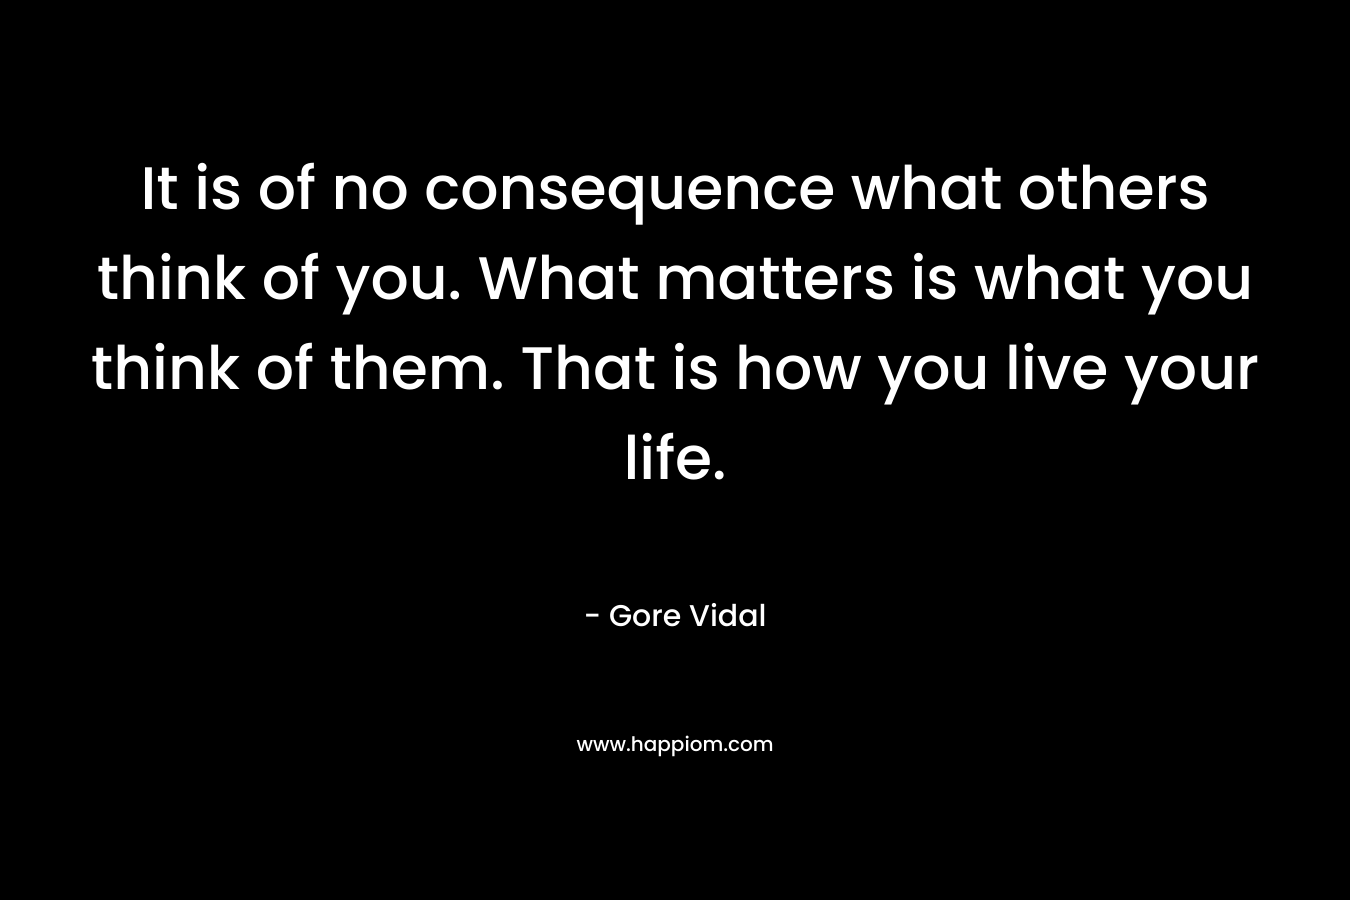 It is of no consequence what others think of you. What matters is what you think of them. That is how you live your life.